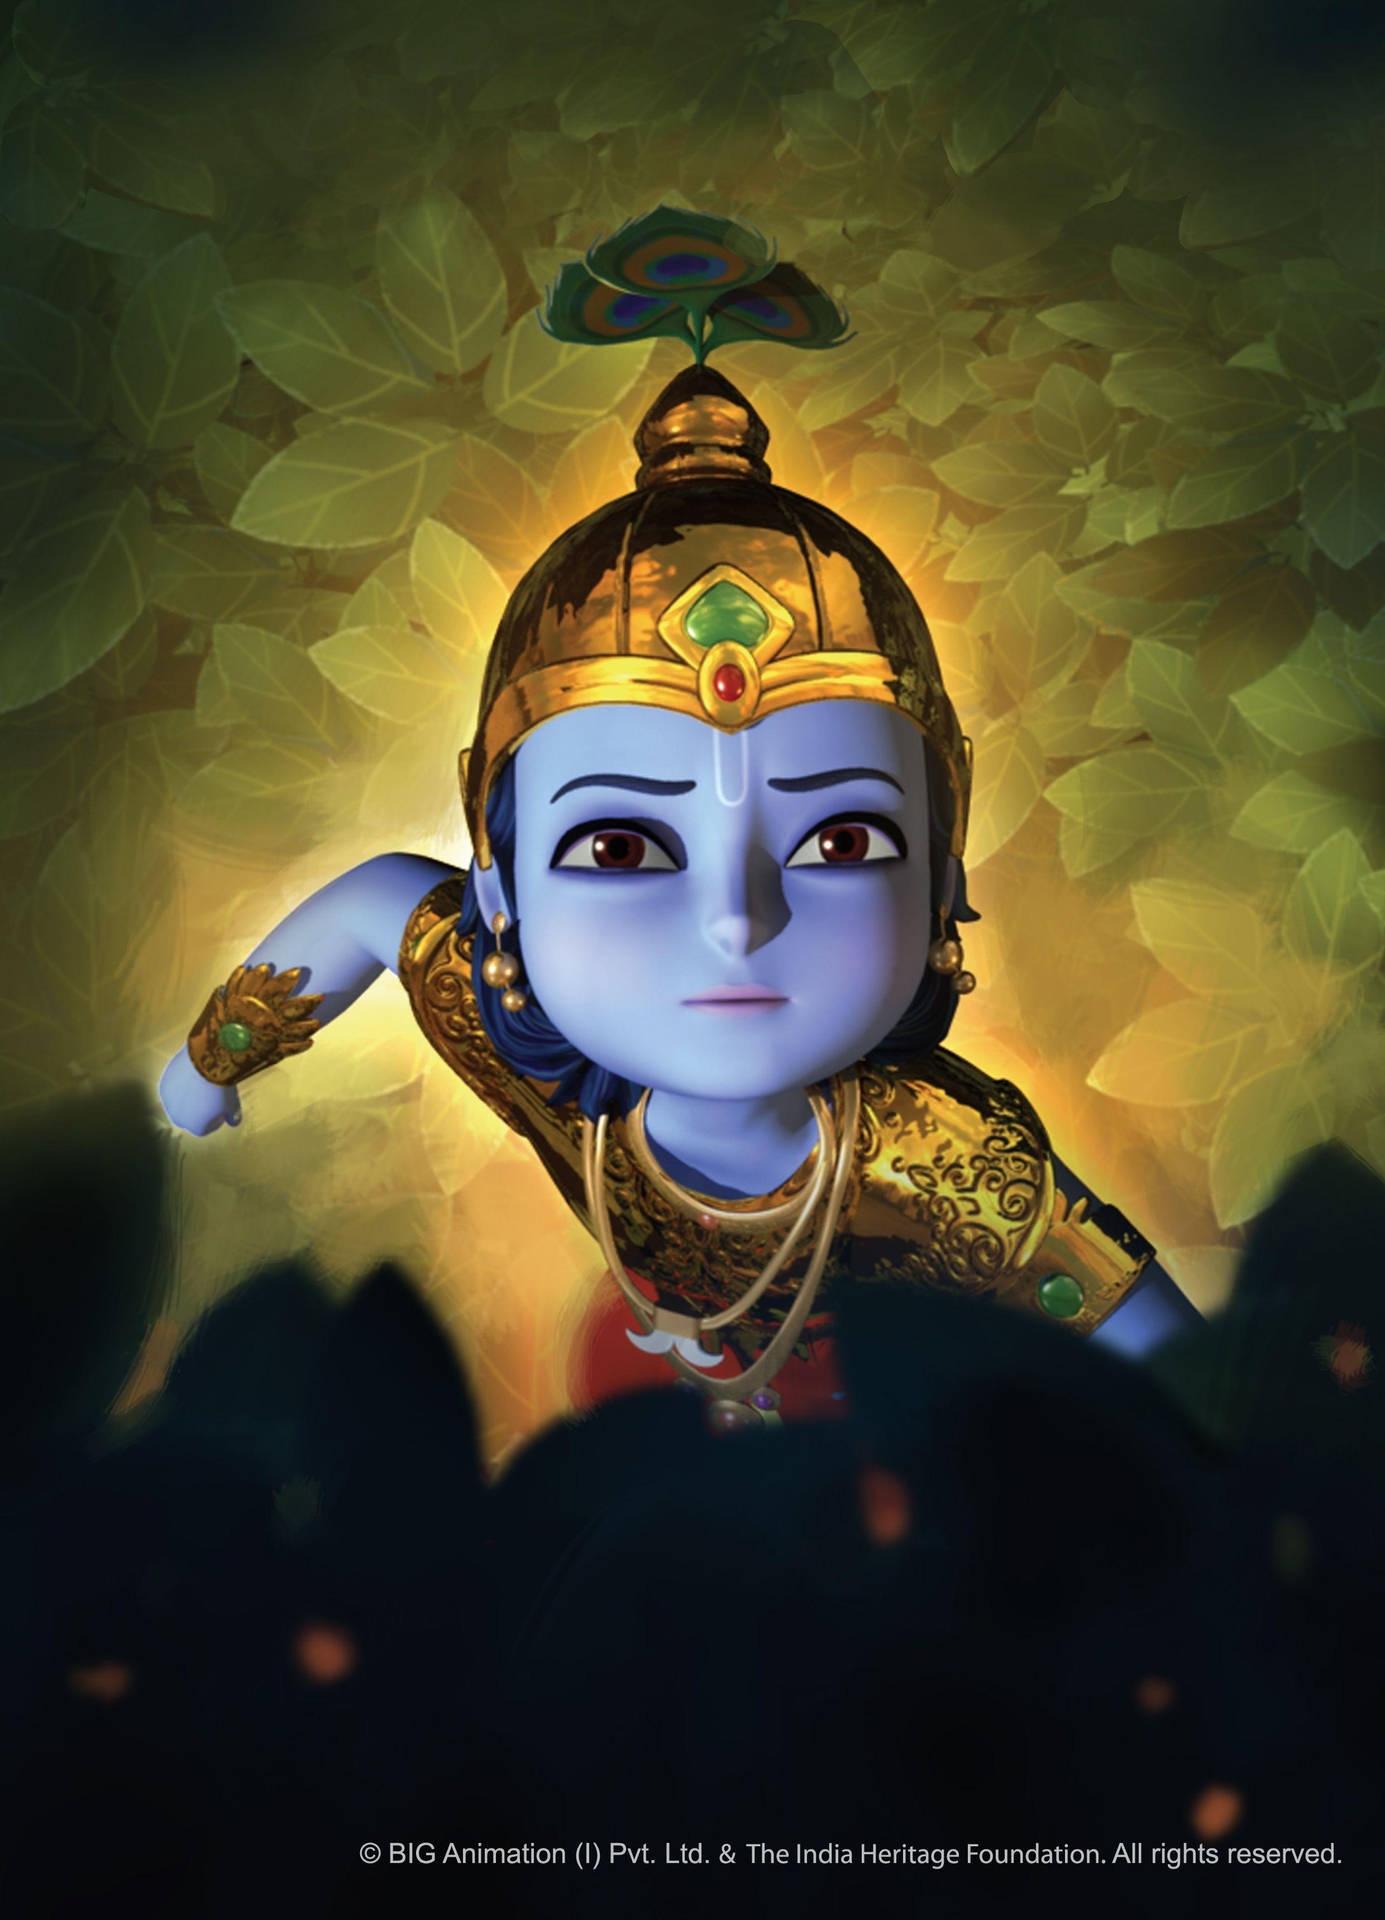 Little Krishna Looking Up In Forest